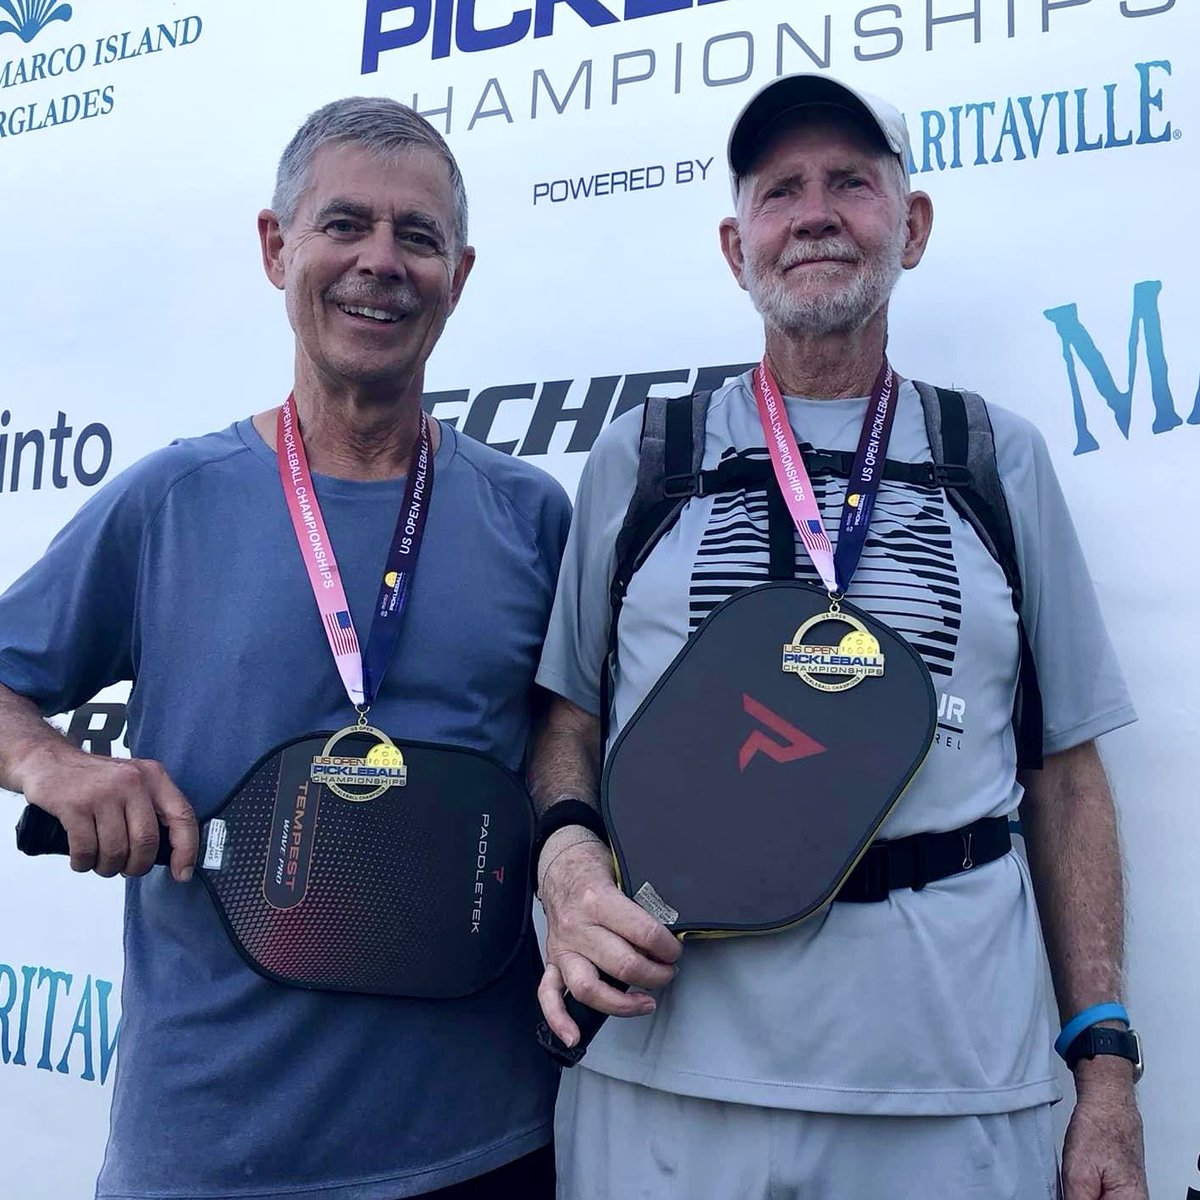 This is John McDaniel. He’s a 75 year old Pickleball player out of Fort Myers, FL. He was recently diagnosed with a rare lung disease, Pulmonary Fibrosis. John uses a portable oxygen concentrator strapped to his back to provide him supplemental oxygen while playing, which he